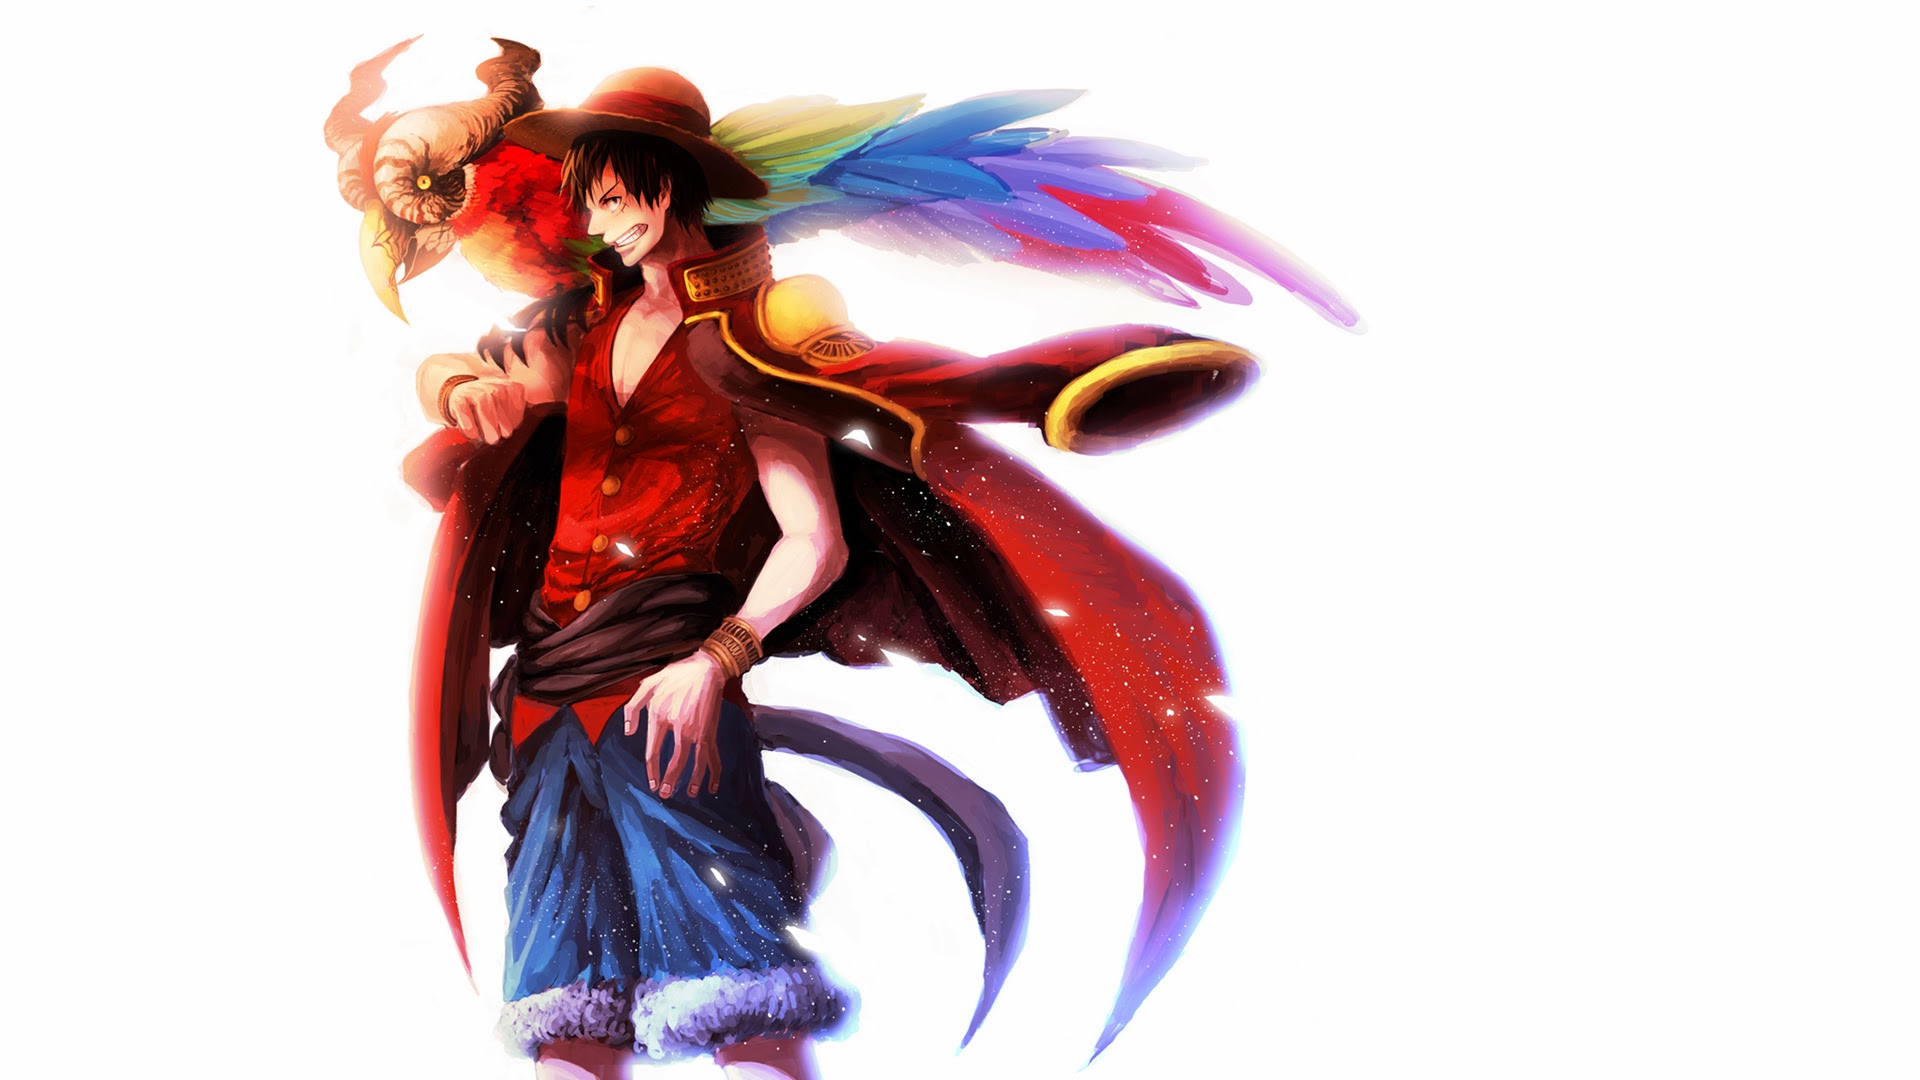 Gallery For Gt Luffy Pirate King Wallpaper